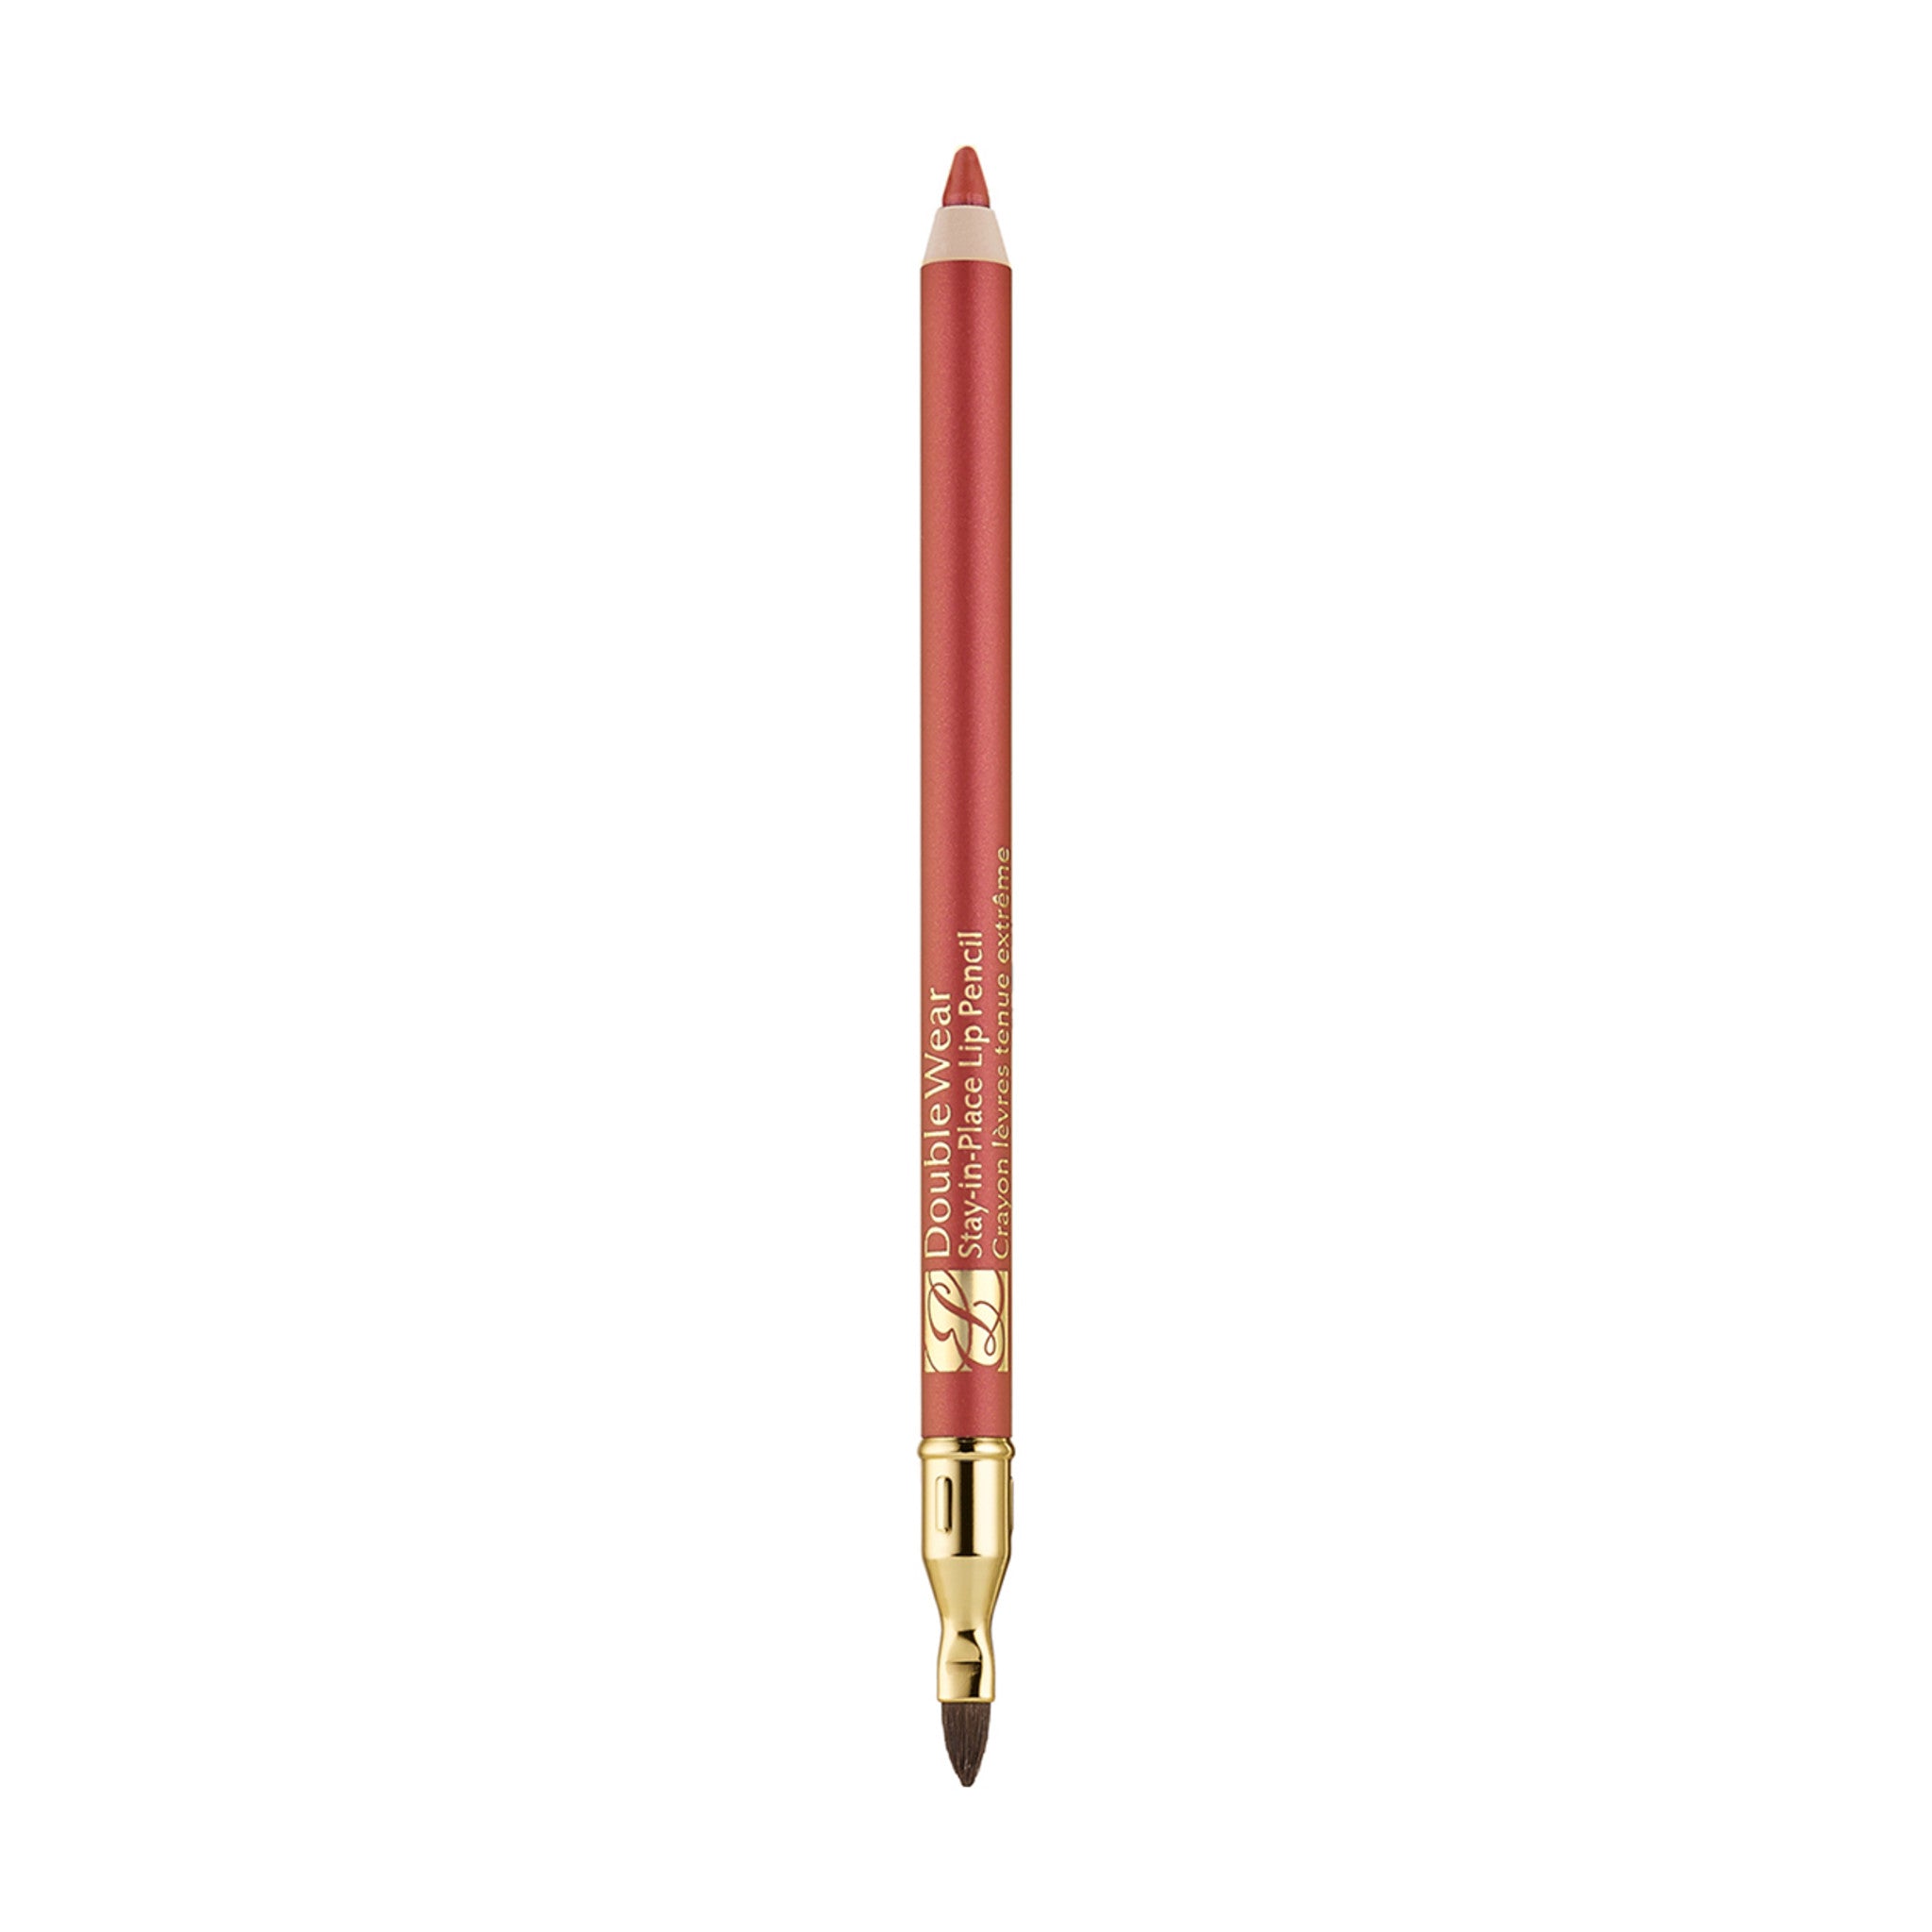 Estée Lauder Double Wear Stay In Place Lip Pencil Color/Shade variant: Rose main image. This product is in the color pink